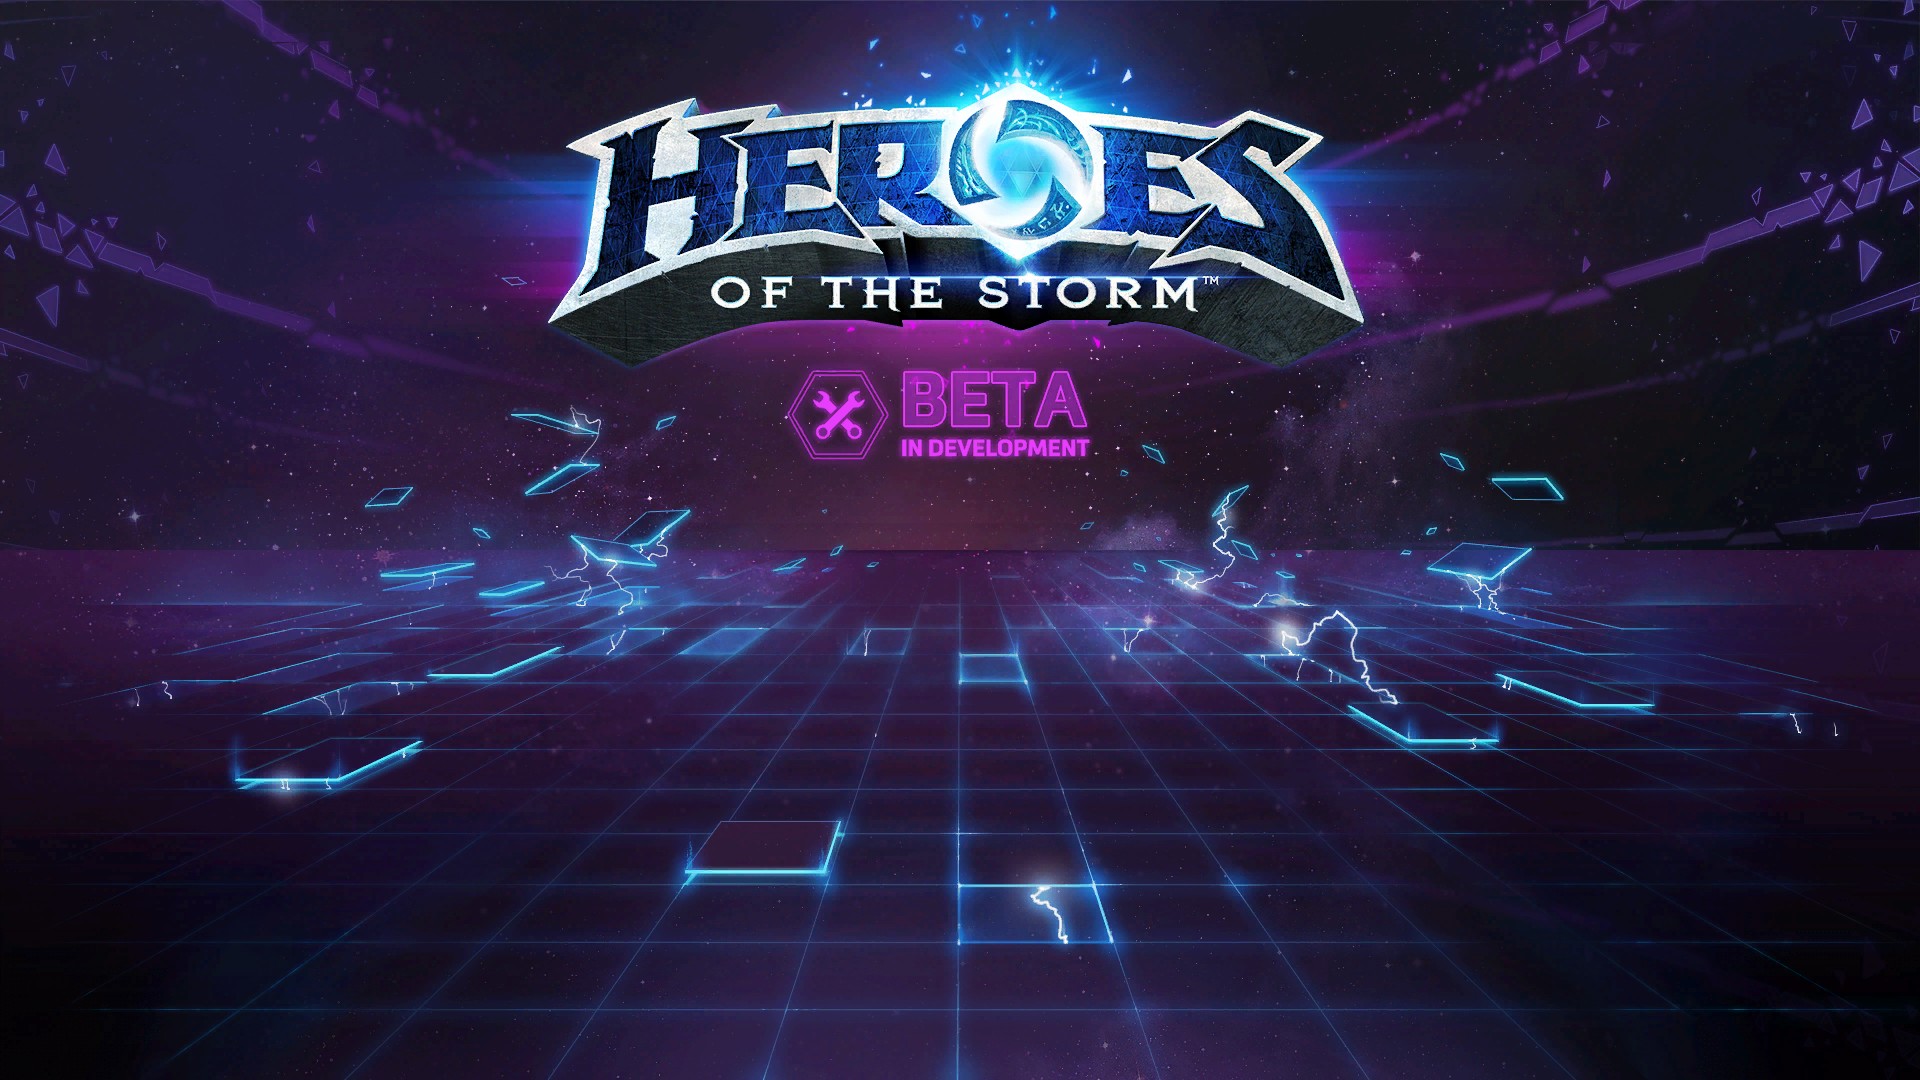 heroes of the storm, Blizzard Entertainment Wallpaper